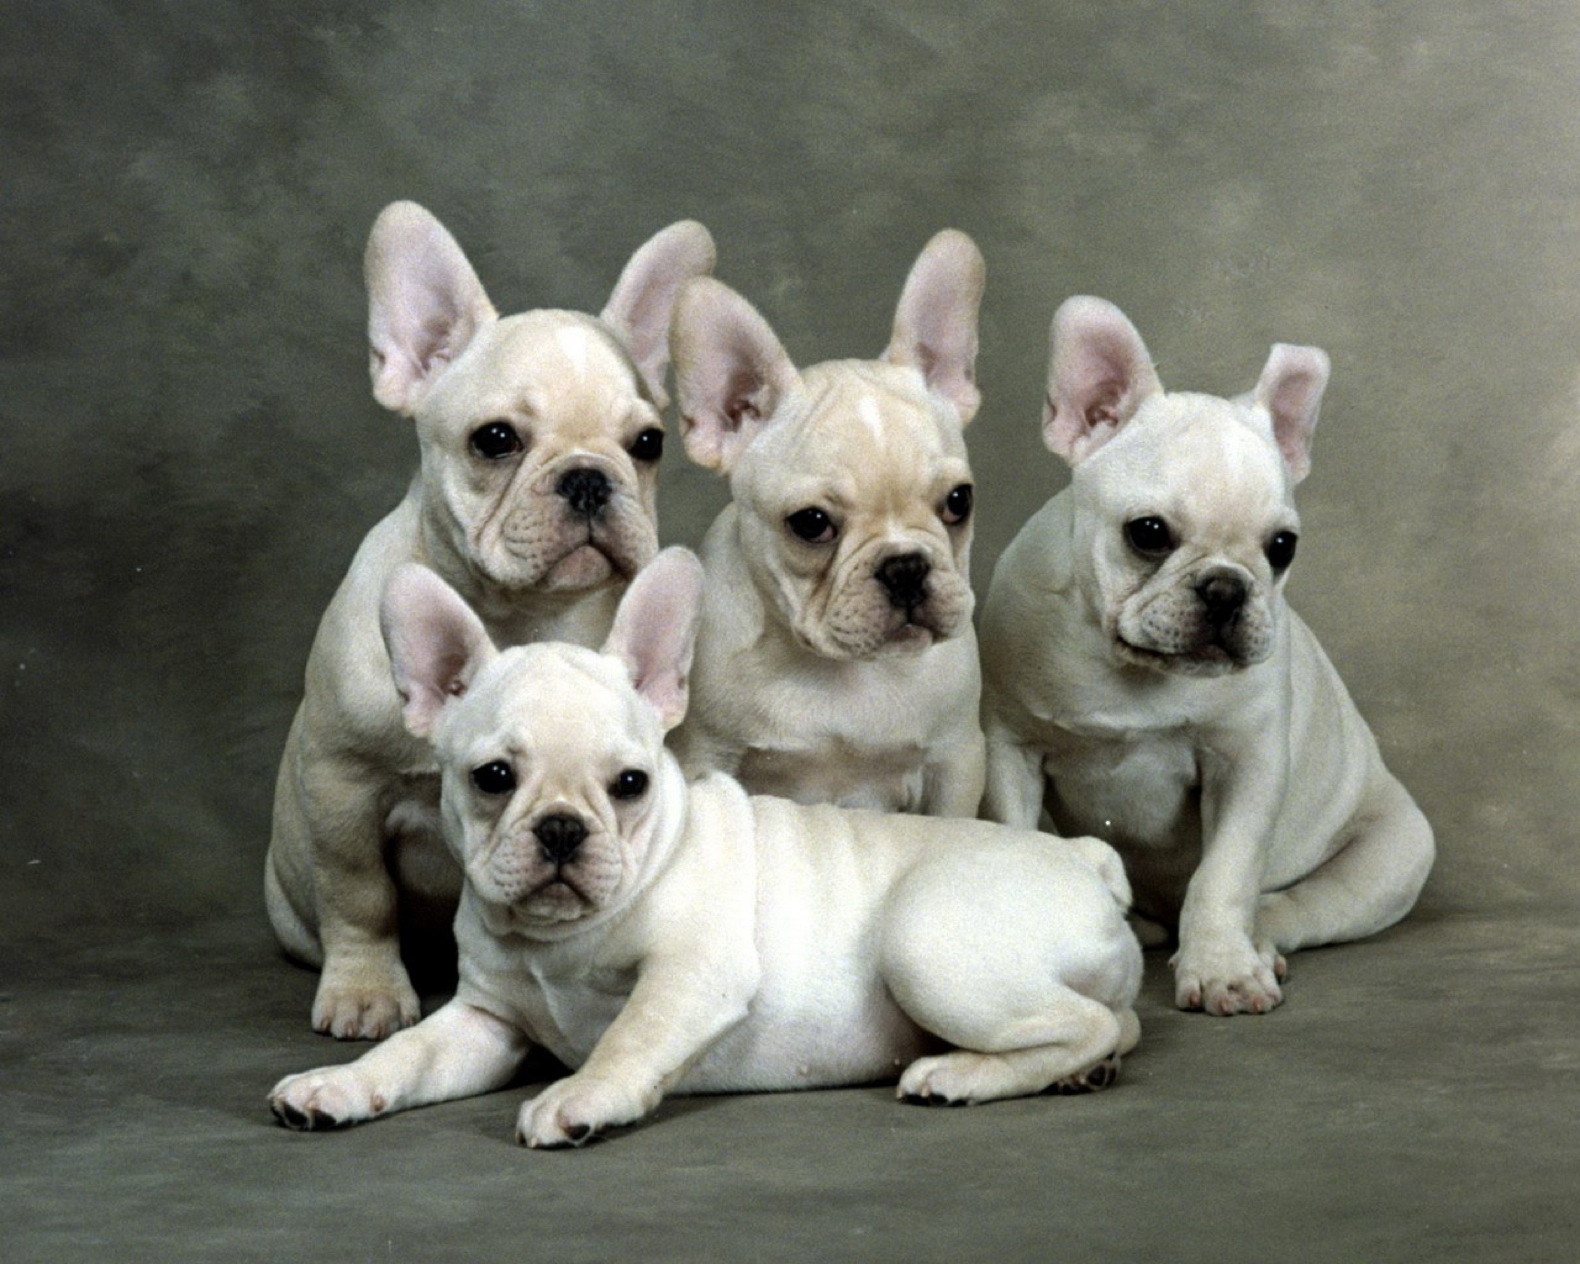 The White French Bulldogs Computer Wallpapers, Desktop Backgrounds